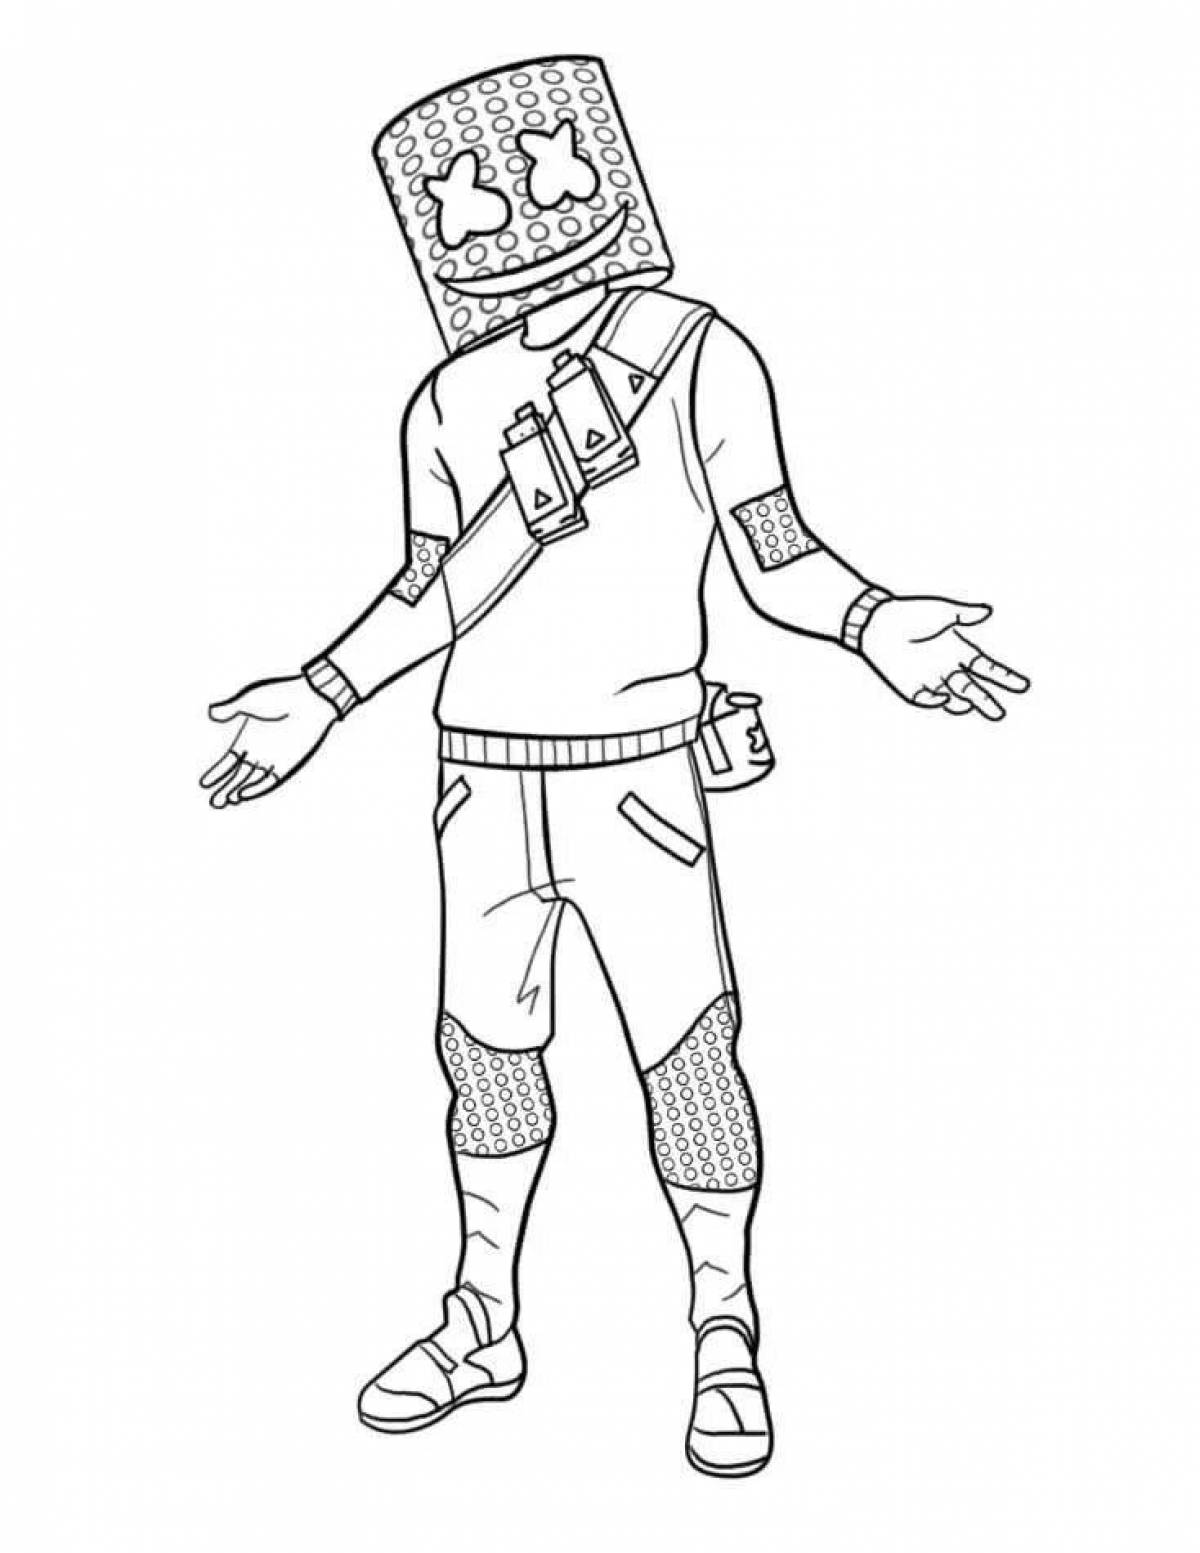 Crazy character coloring pages from games